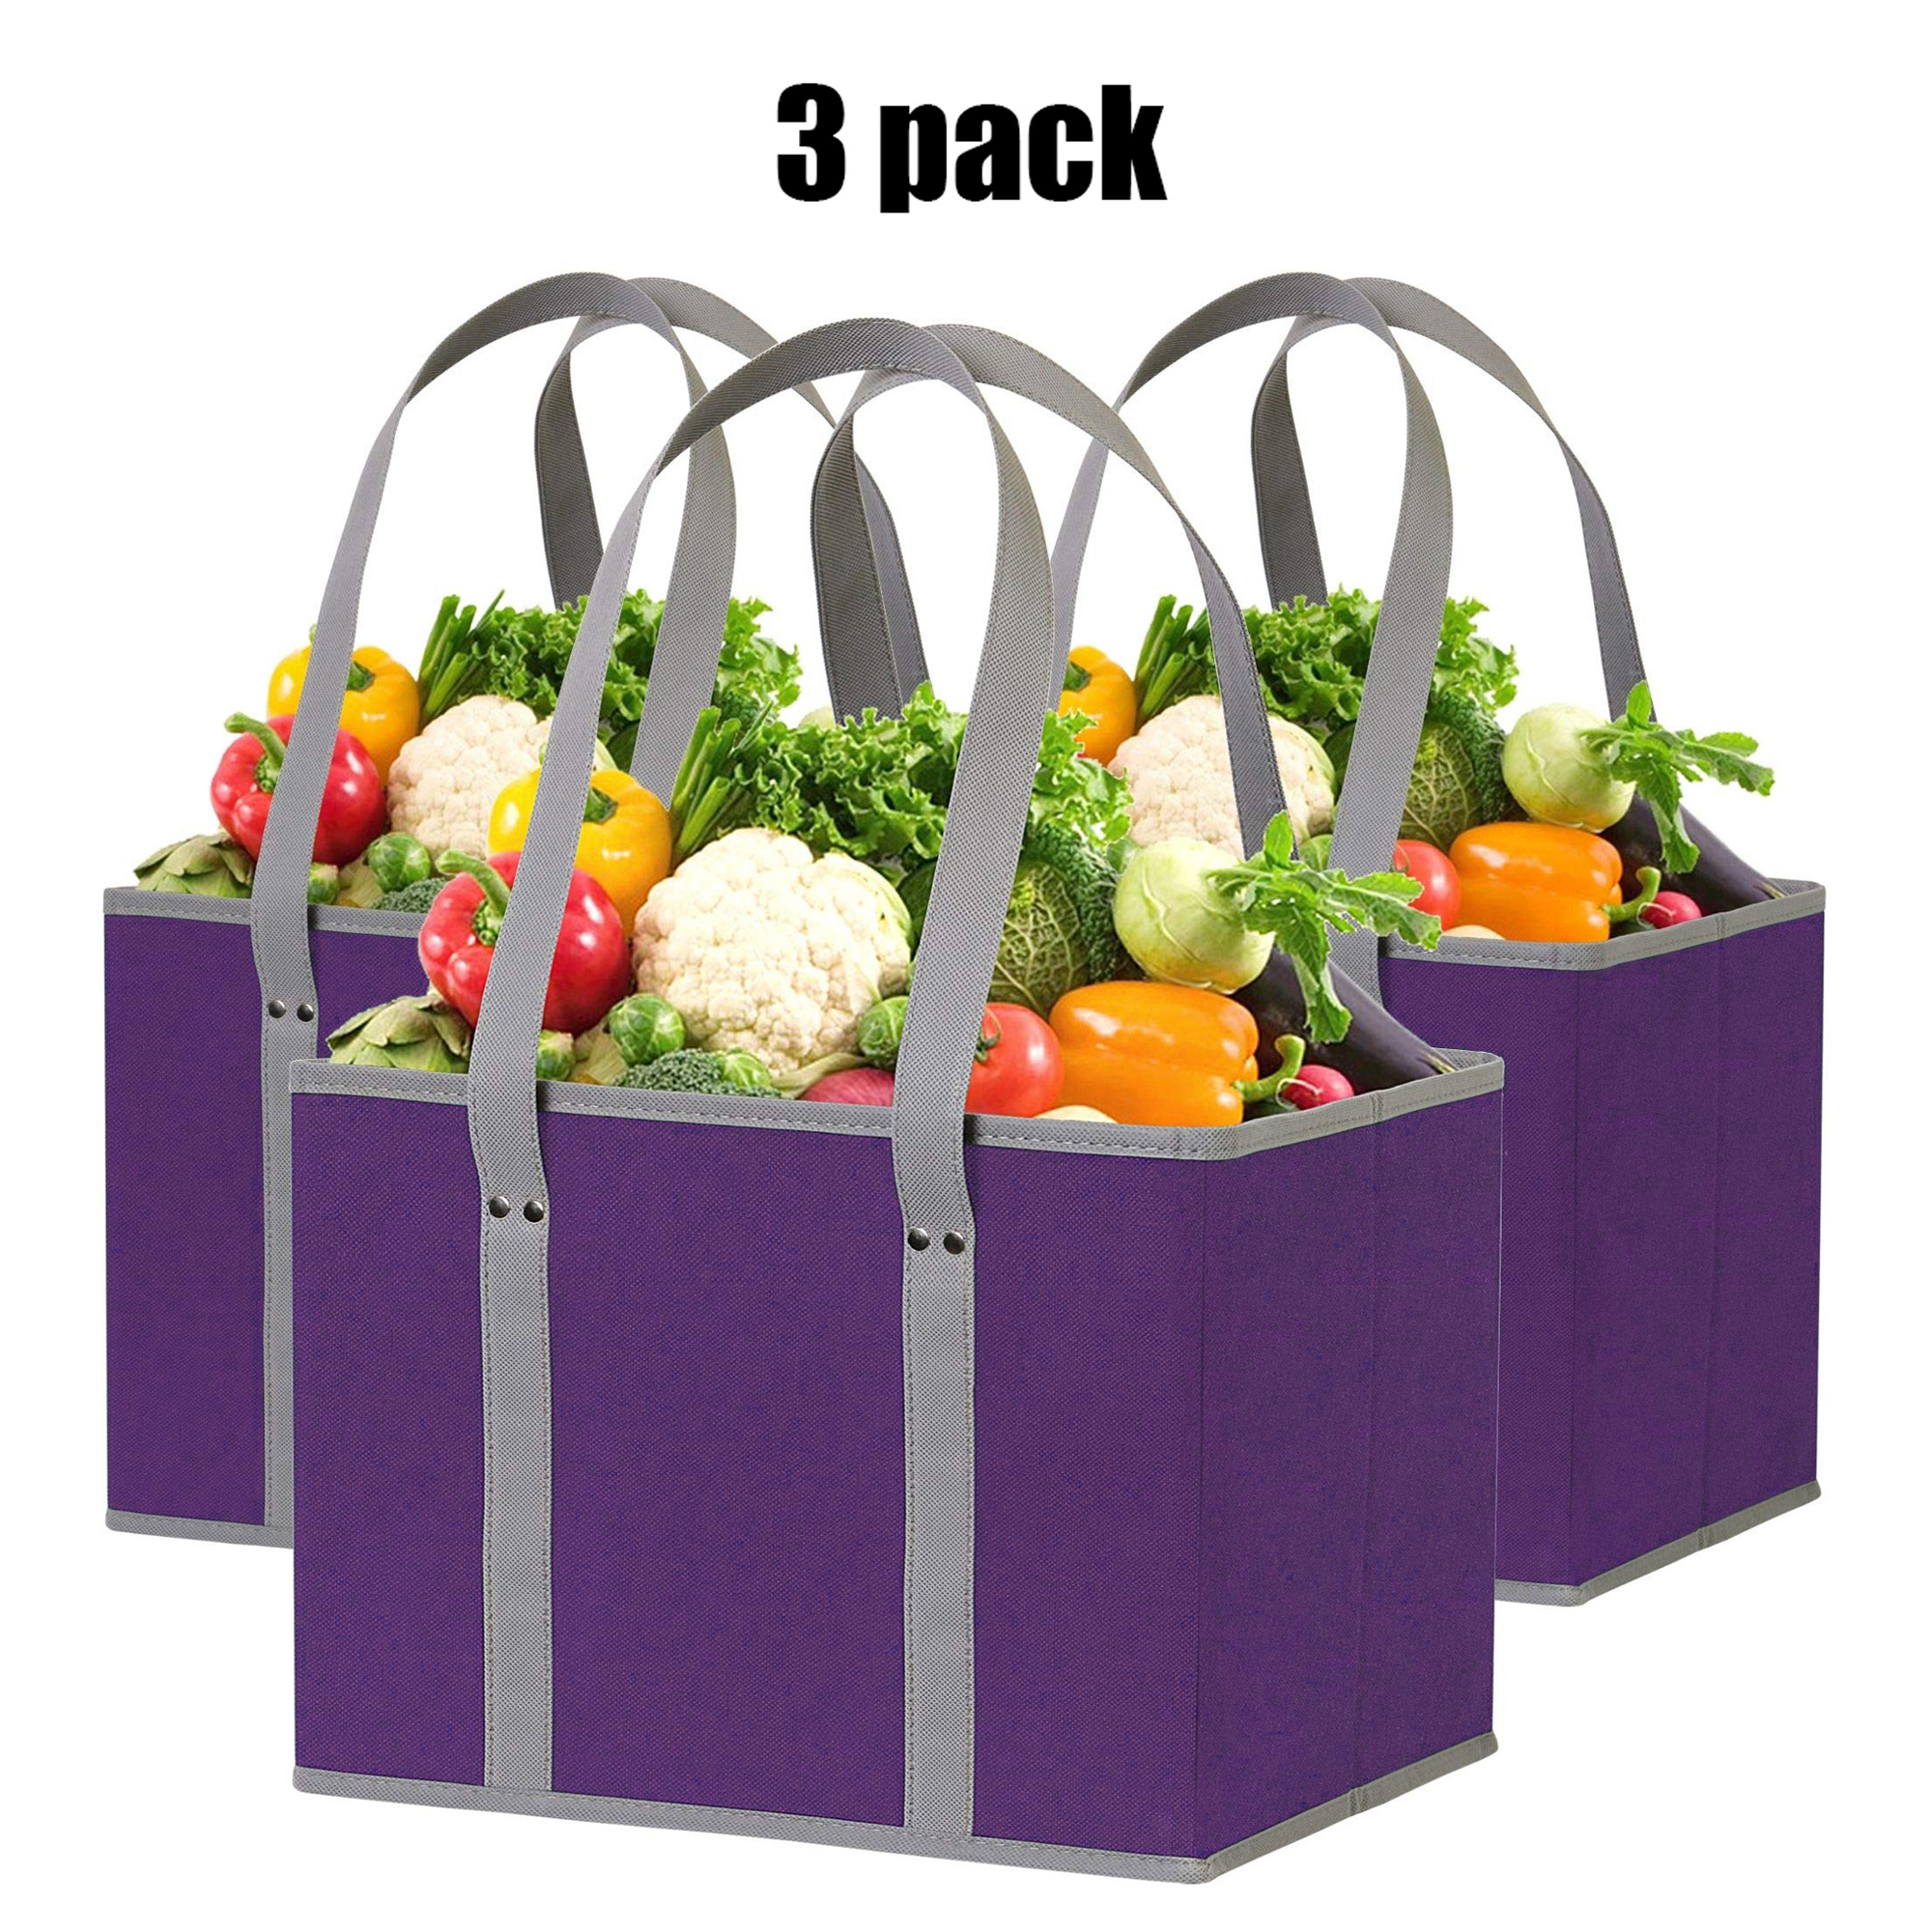 Reusable Grocery Bags, Heavy Duty Reusable Shopping Bags With Box